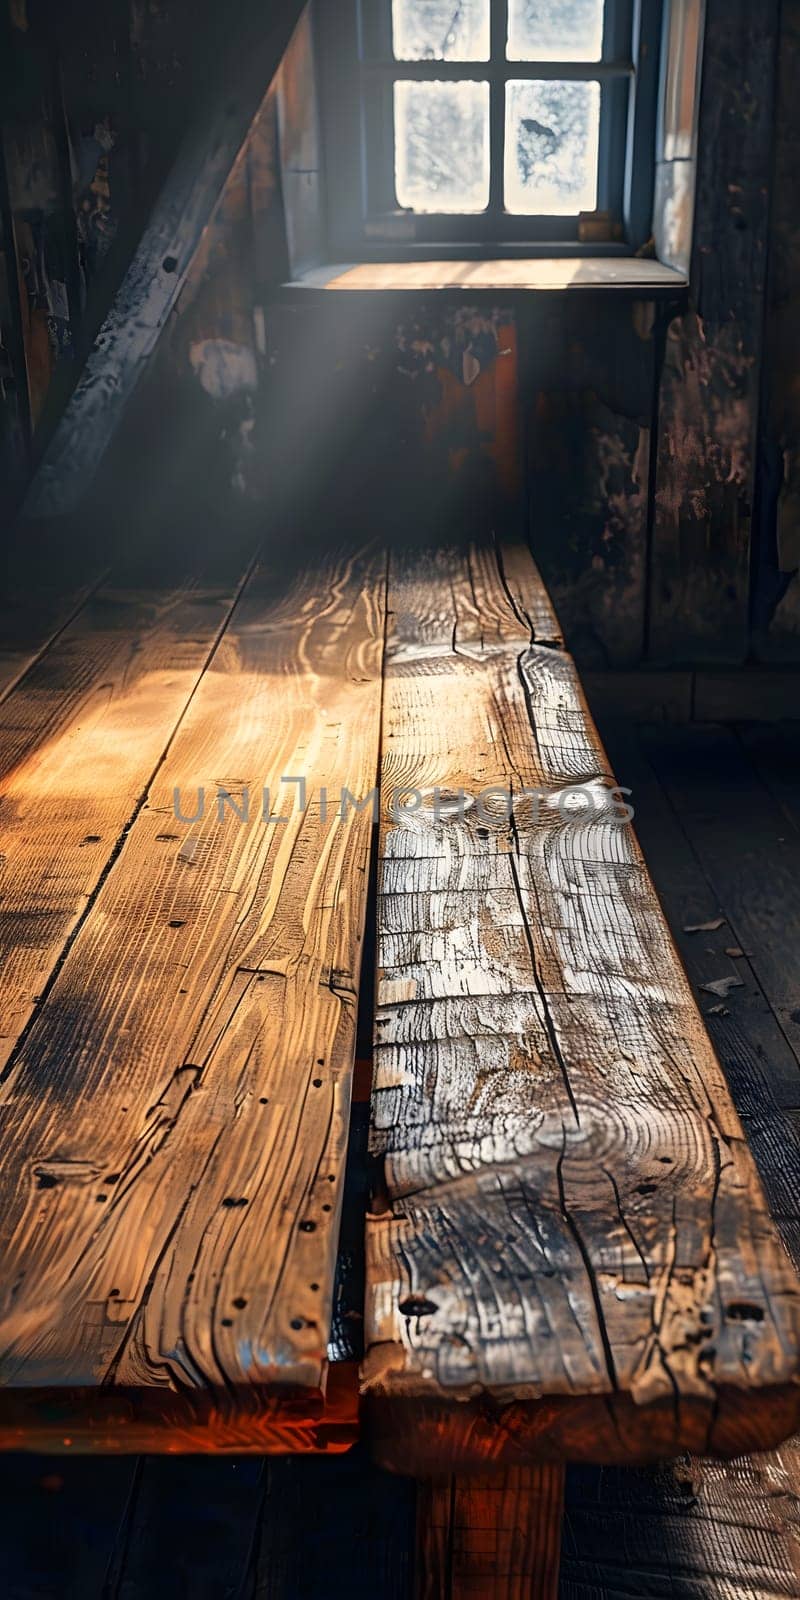 The suns rays highlight the wooden table, showcasing the natural beauty of the hardwood plank. The buildings flooring gleams with a warm wood stain